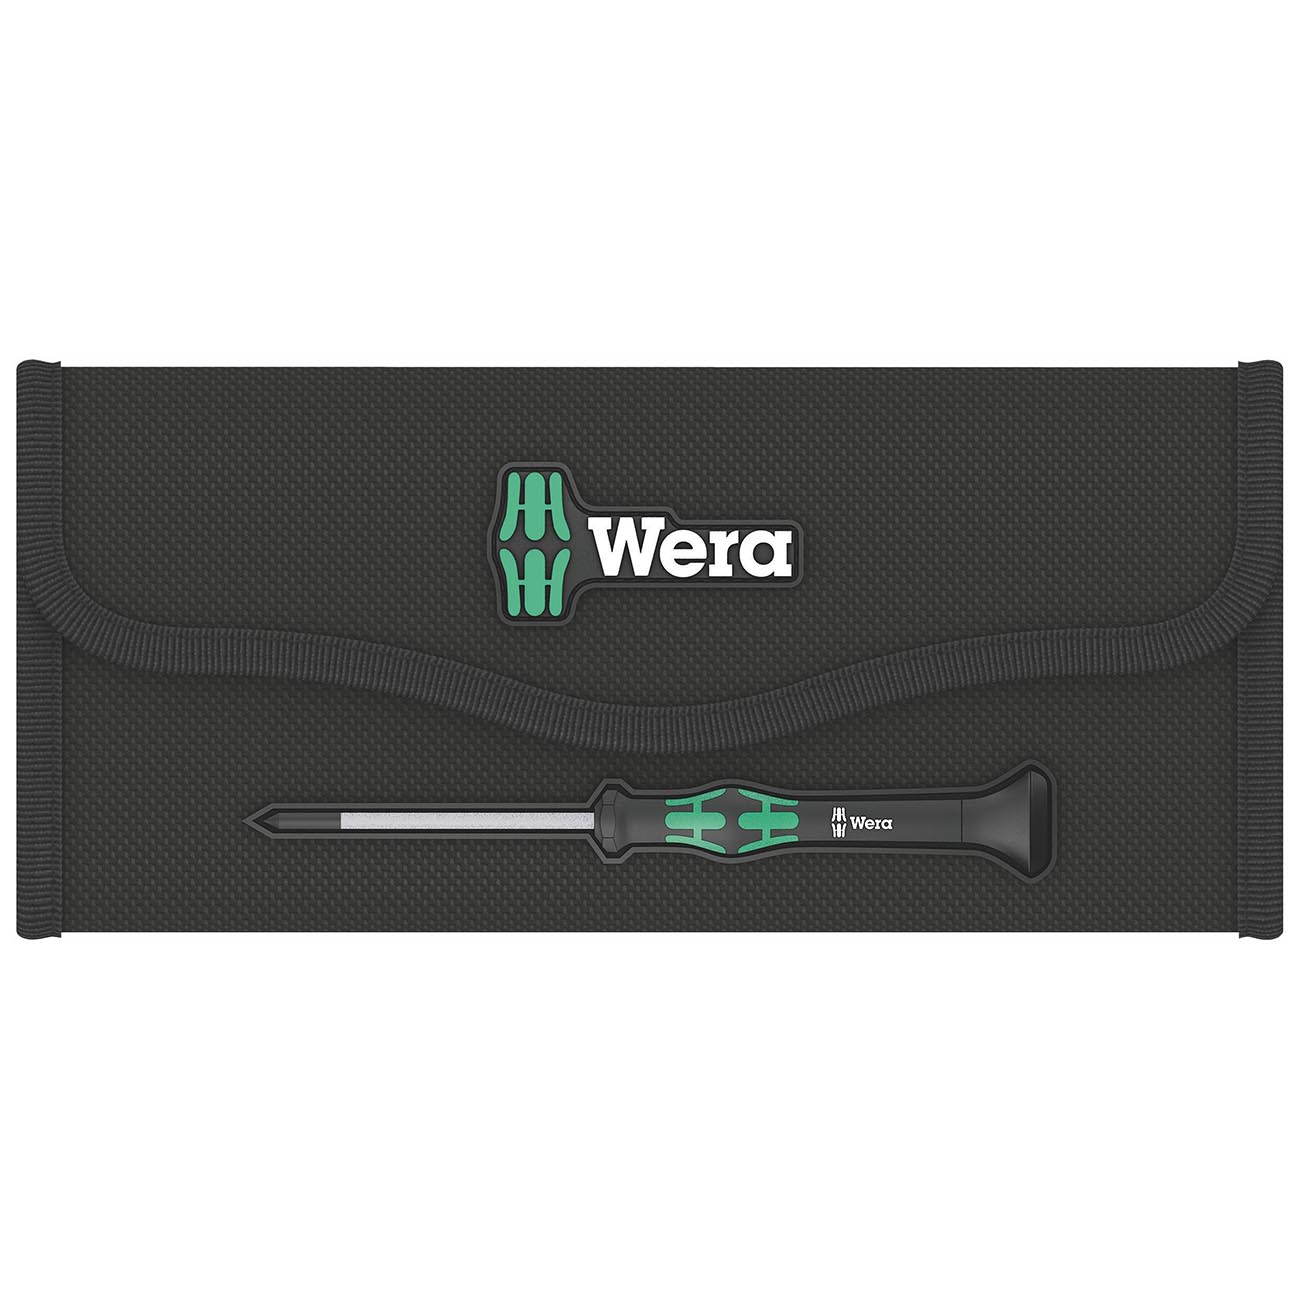 Wera Pouch for Precision Micro Screwdrivers - Empty Pouch (Holds 12)